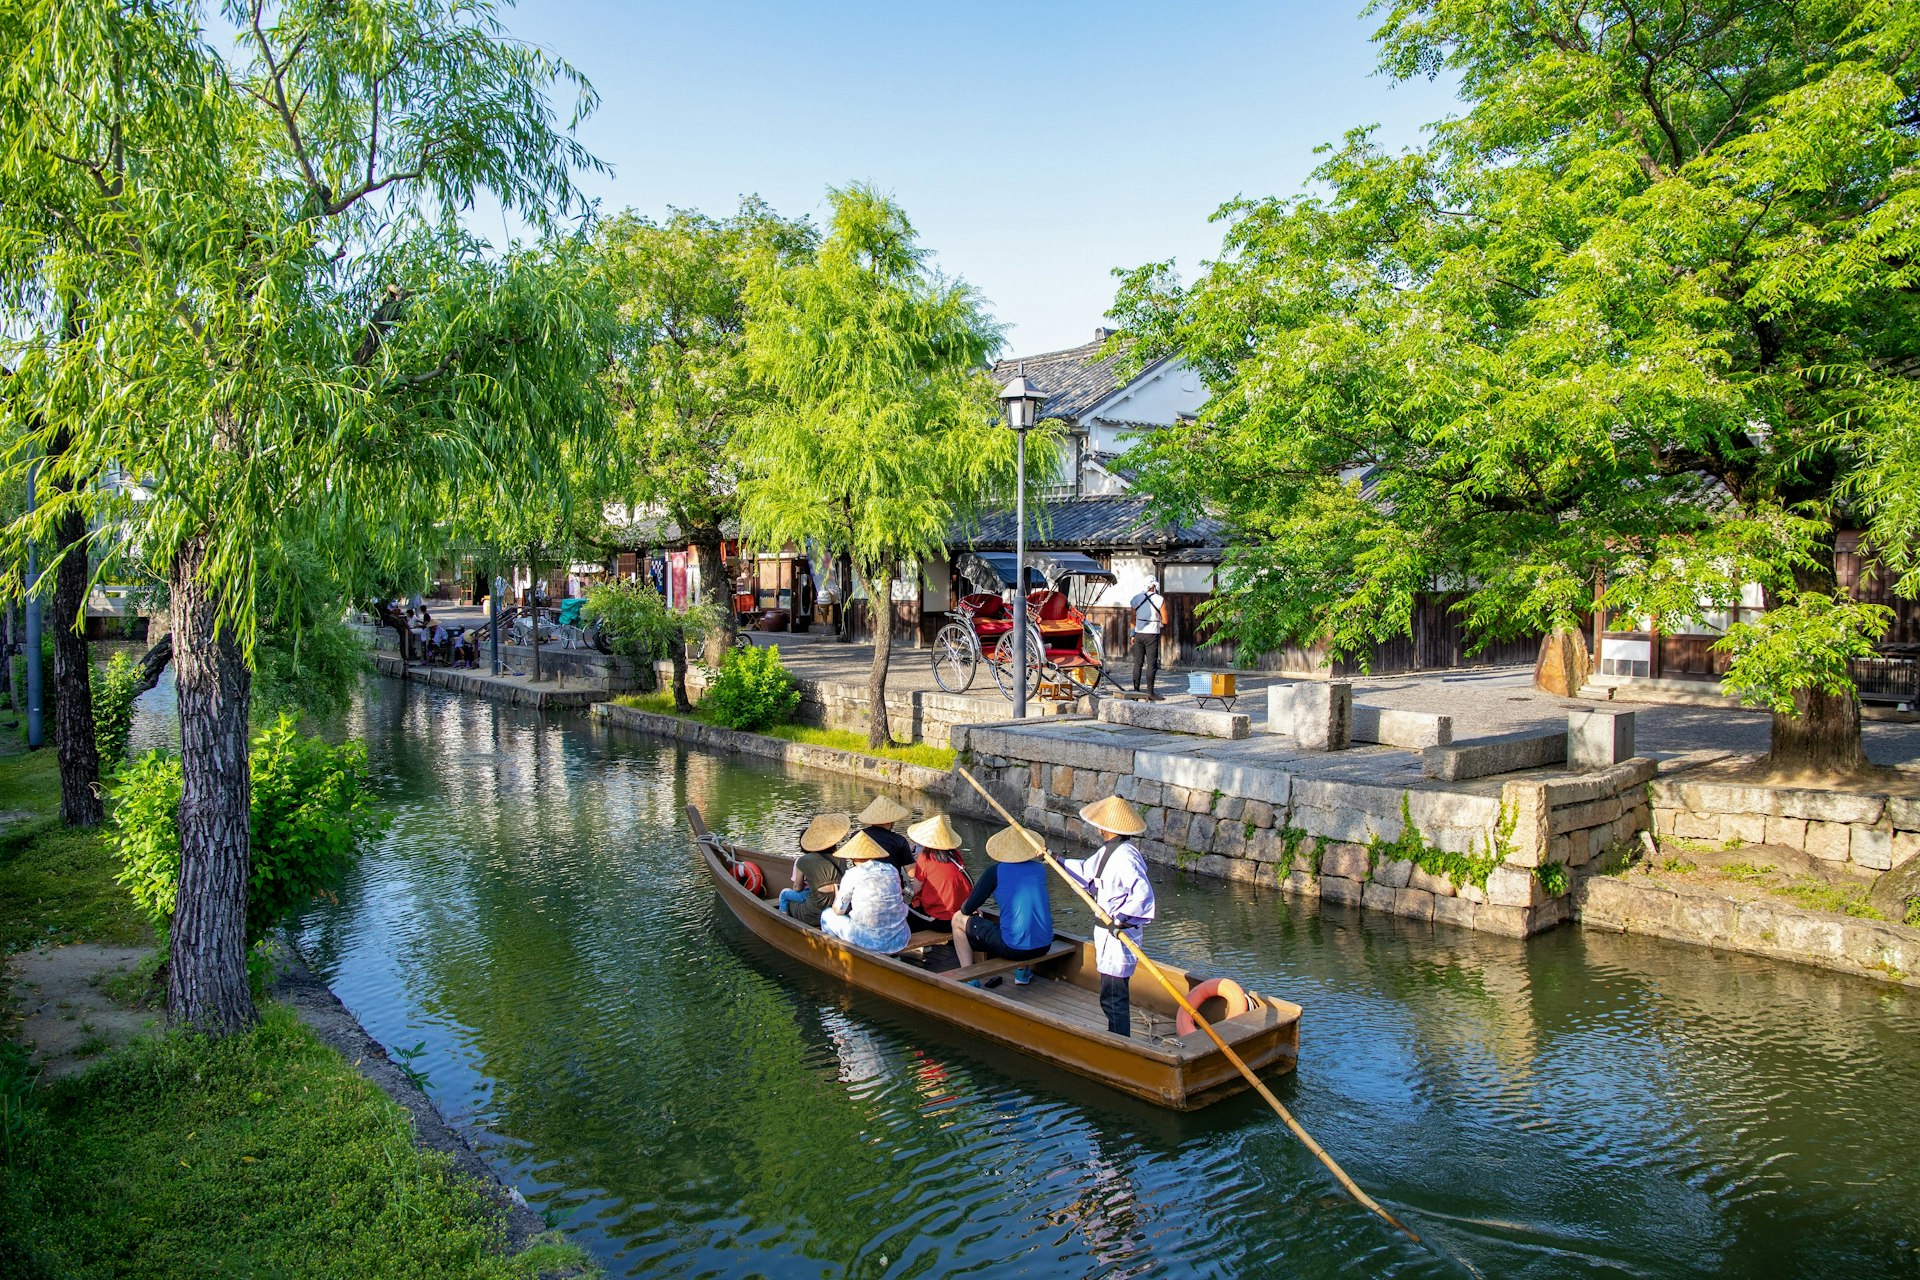 A man in a kimono rows a boat of passengers, all wearing conical rice hats, along a narrow river in the town of Kurashiki. The river is flanked by green trees.